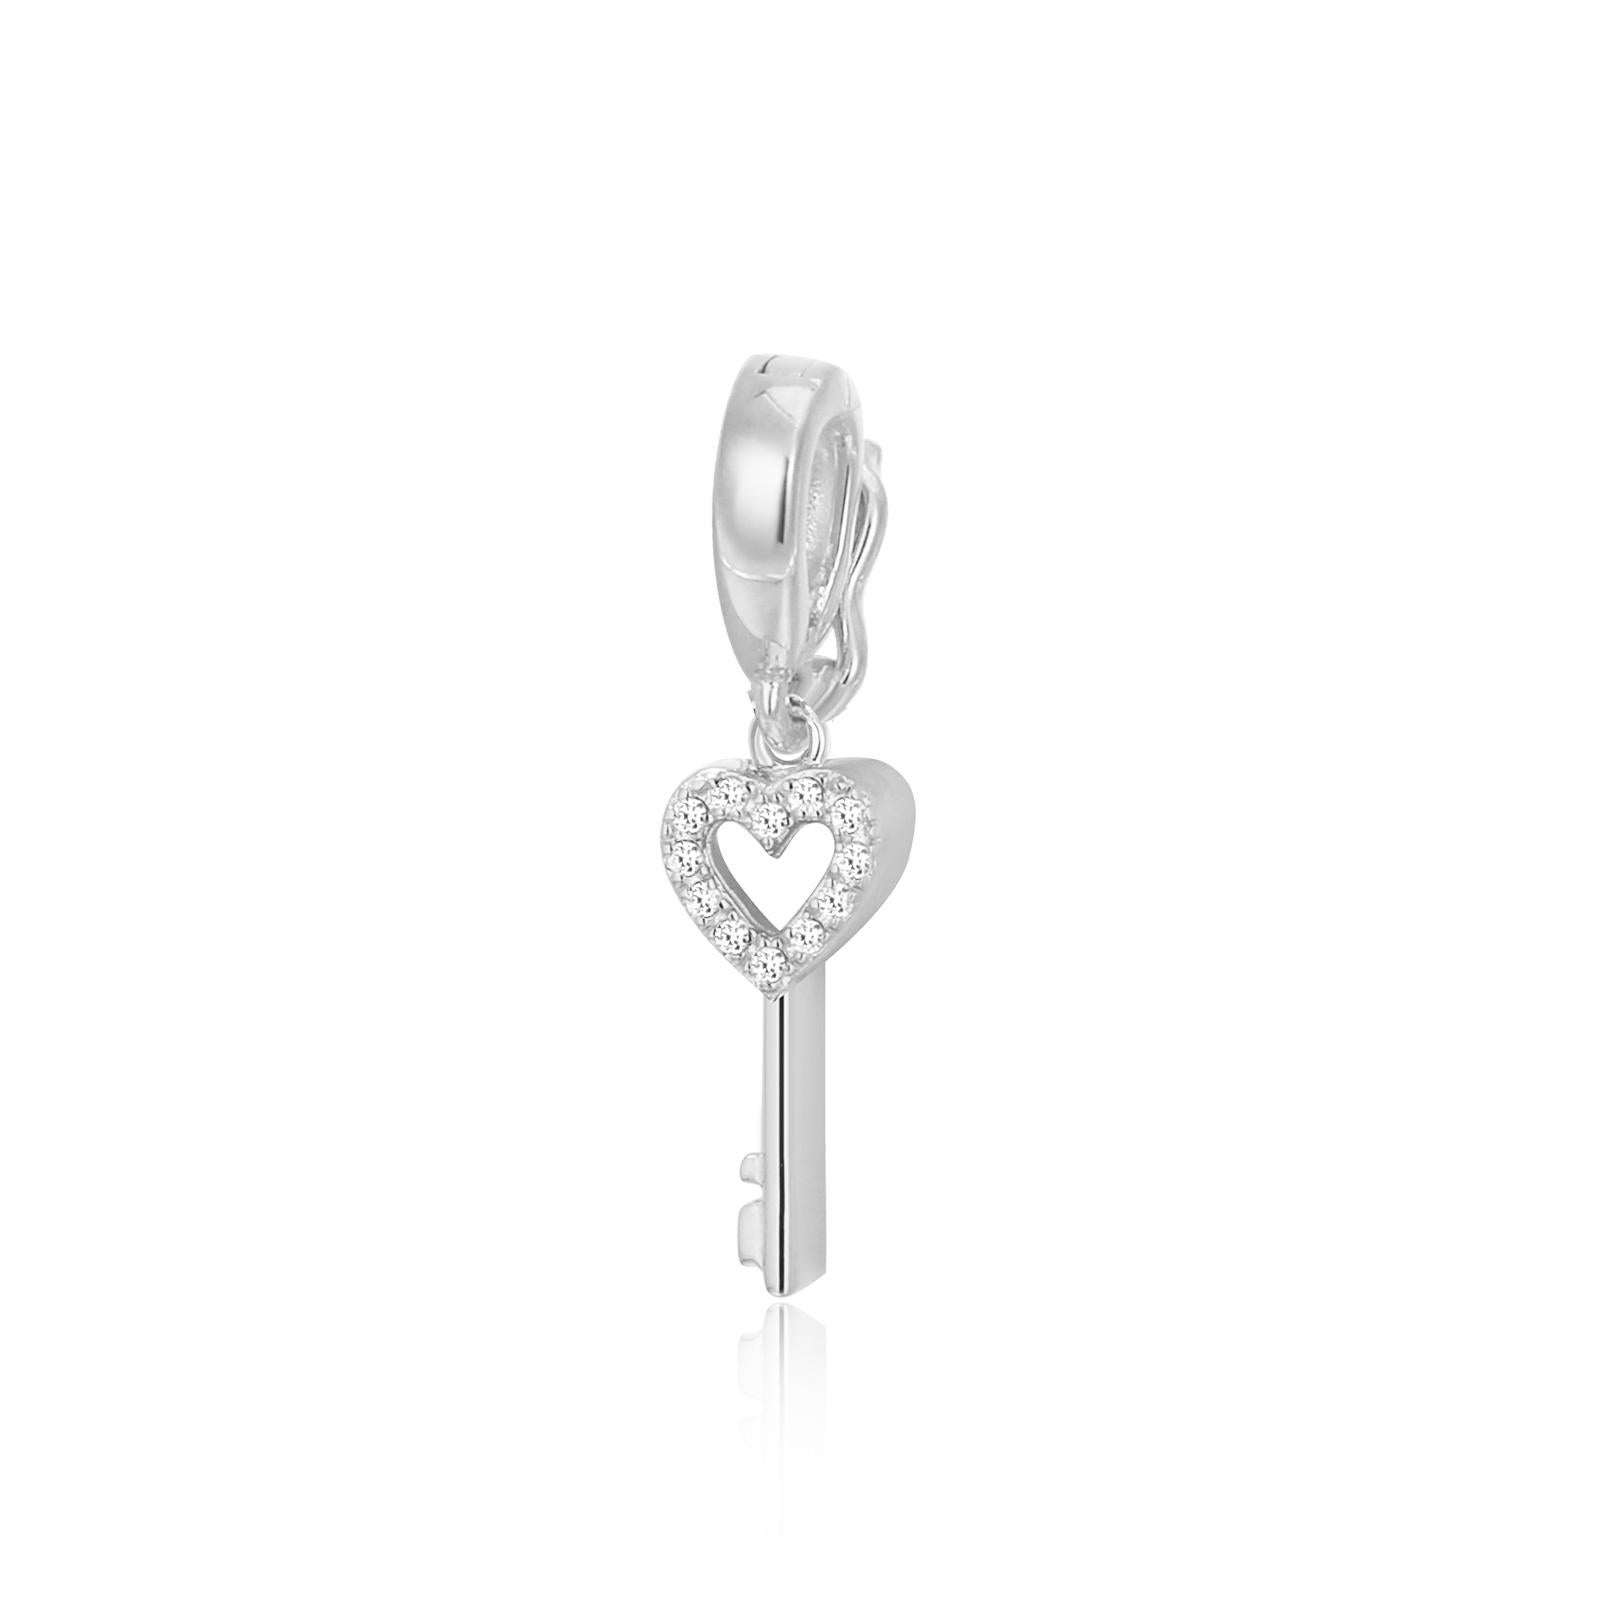 When it comes to self-expression, the style possibilities are endless. This heart key pave pendant/charm gives you endless possibilities for mixing, matching and stacking, while showing your eternal and enduring strength . .925 sterling silver base.